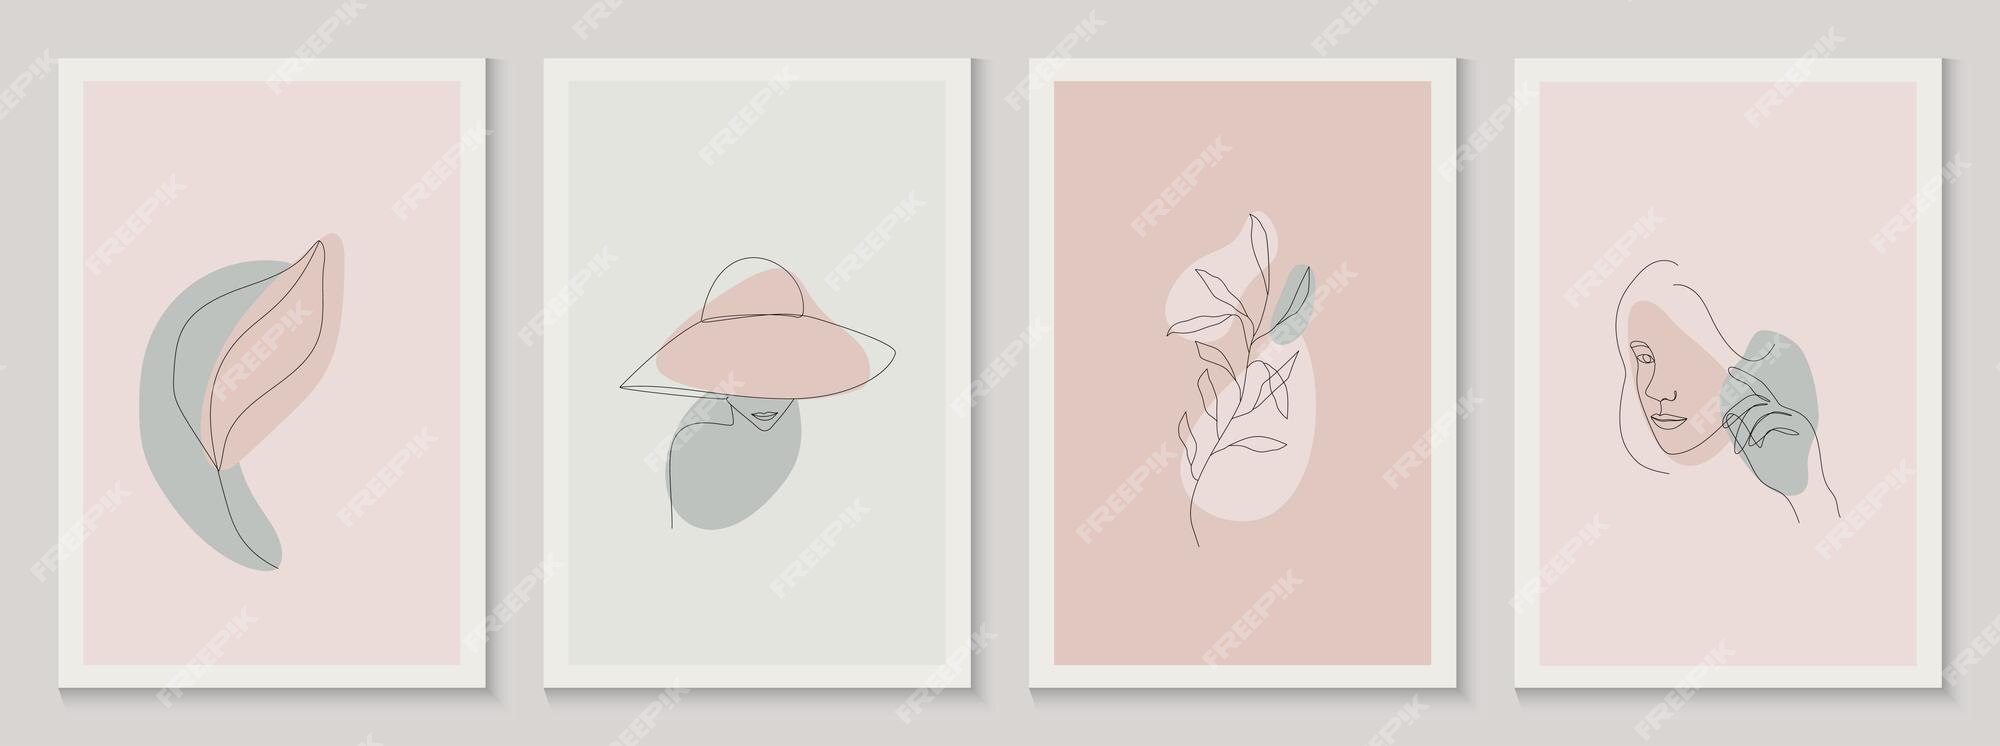 Abstract shape art with floral elements. Floral Aesthetic